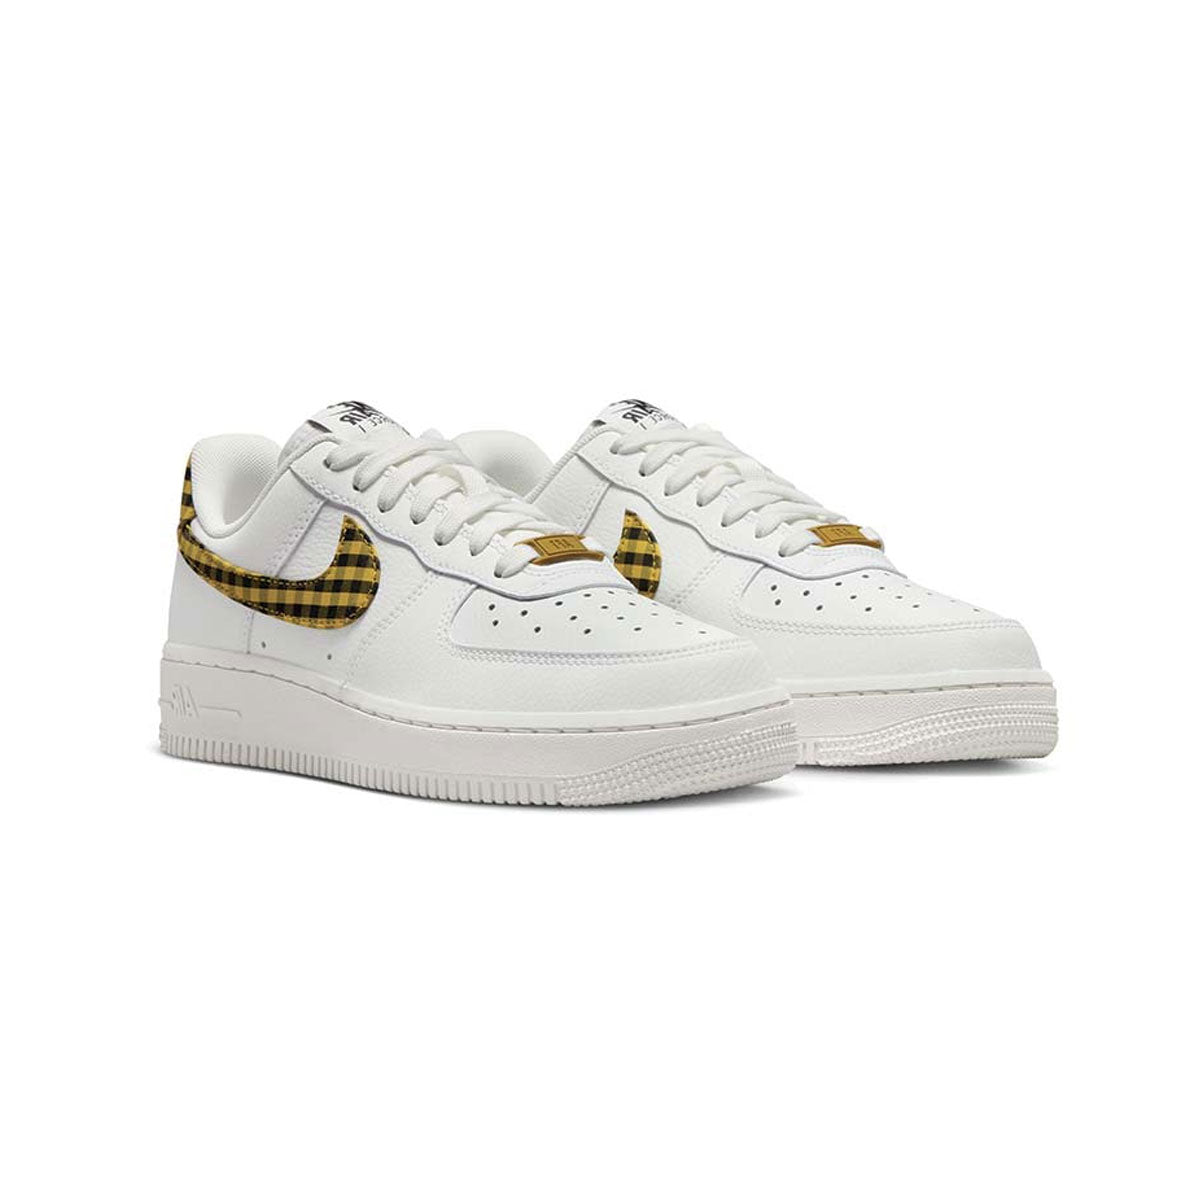 Nike Women's Air Force 1 '07 ESS Trend